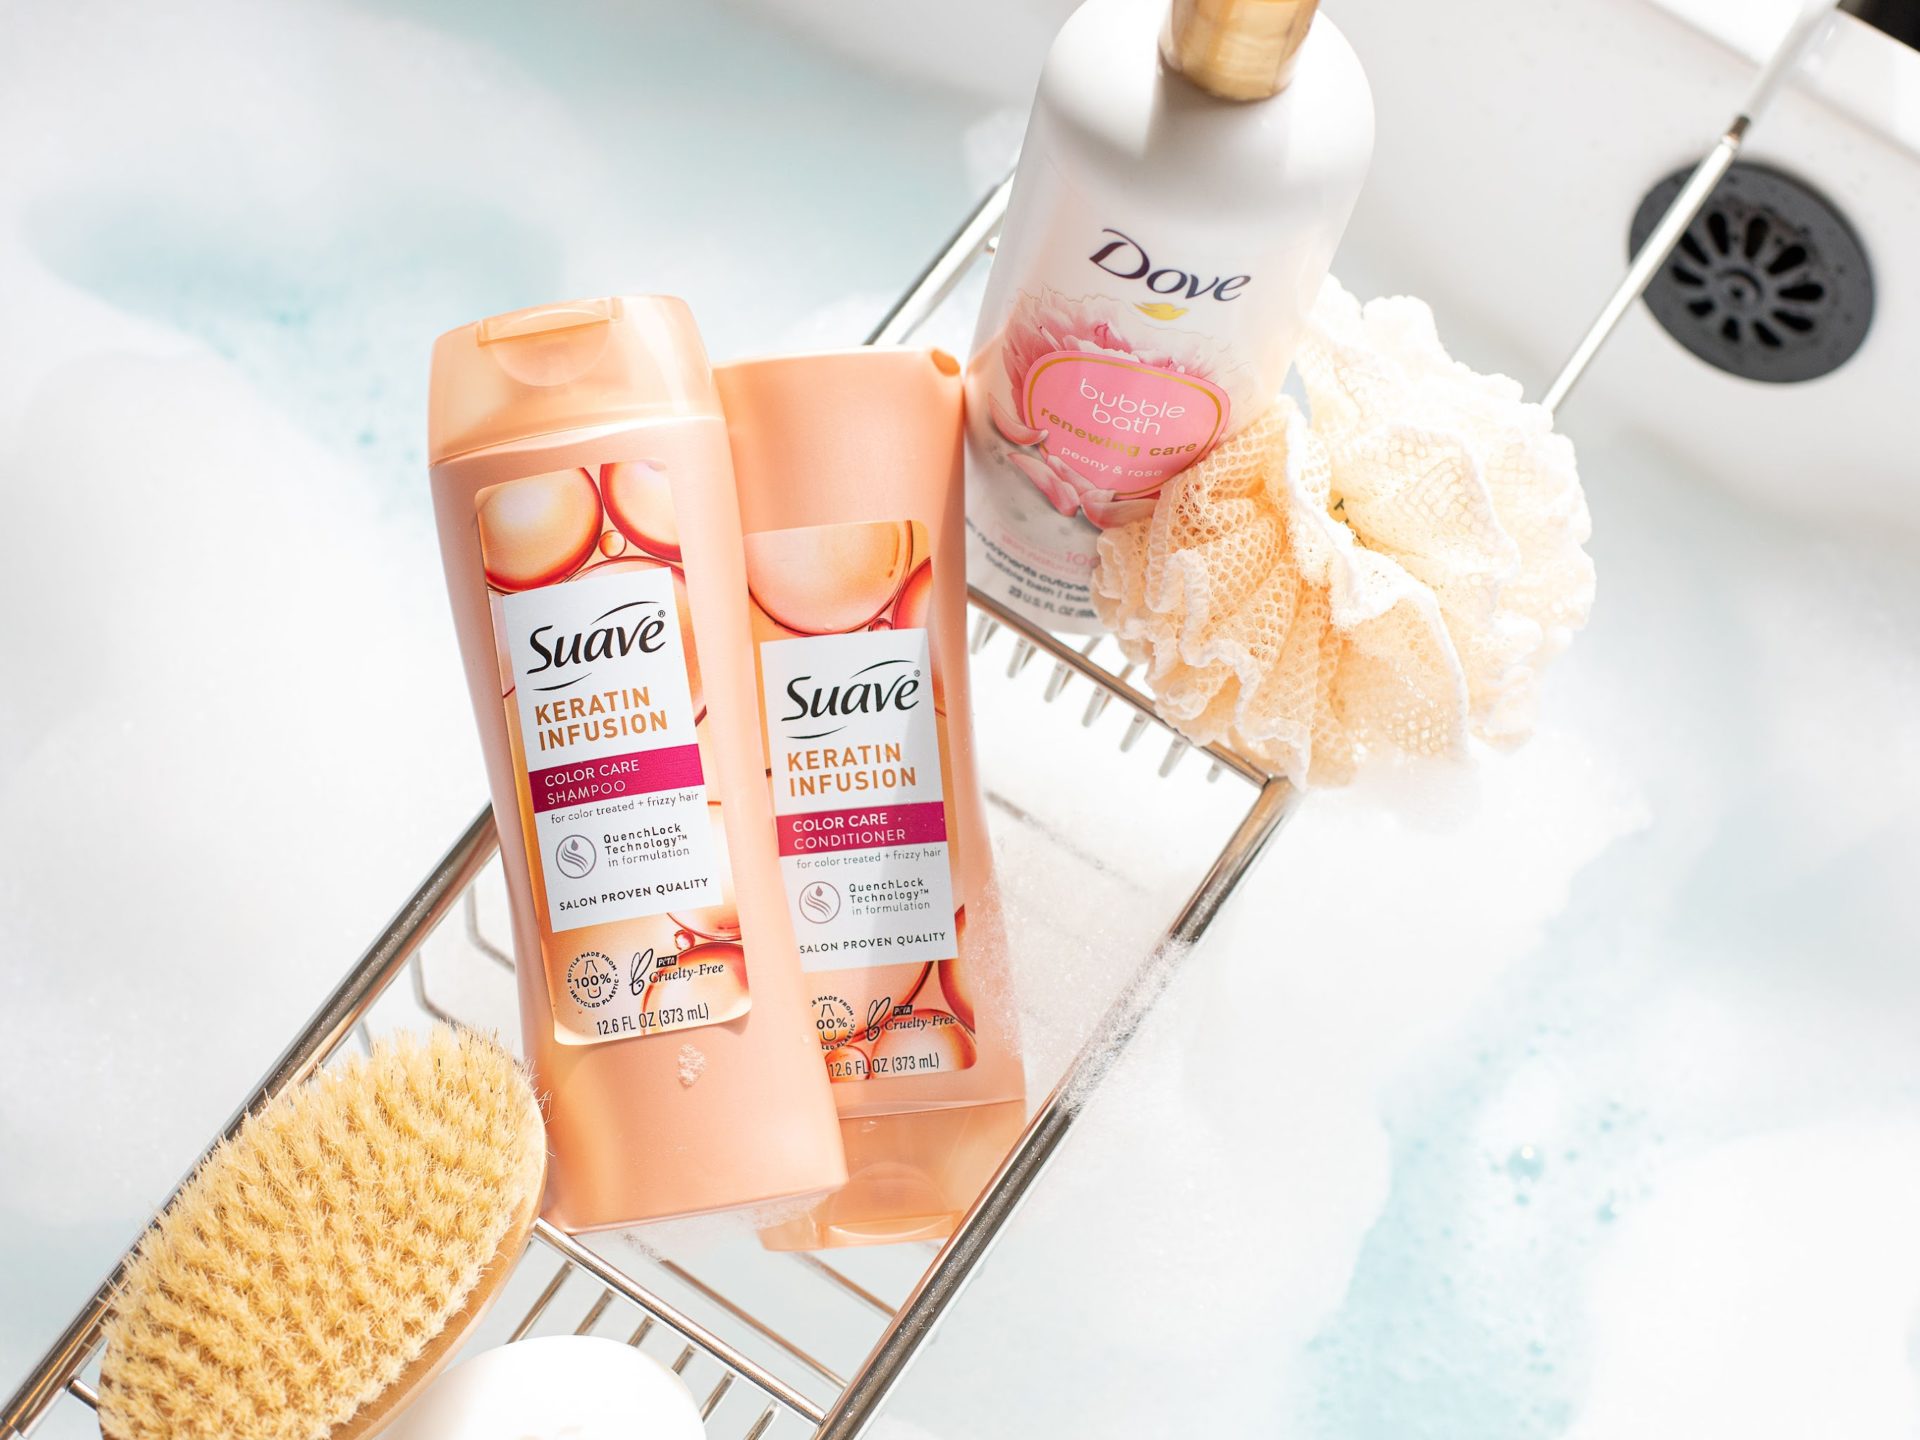 Get Suave Hair Care For As Low As $1.29 At Kroger